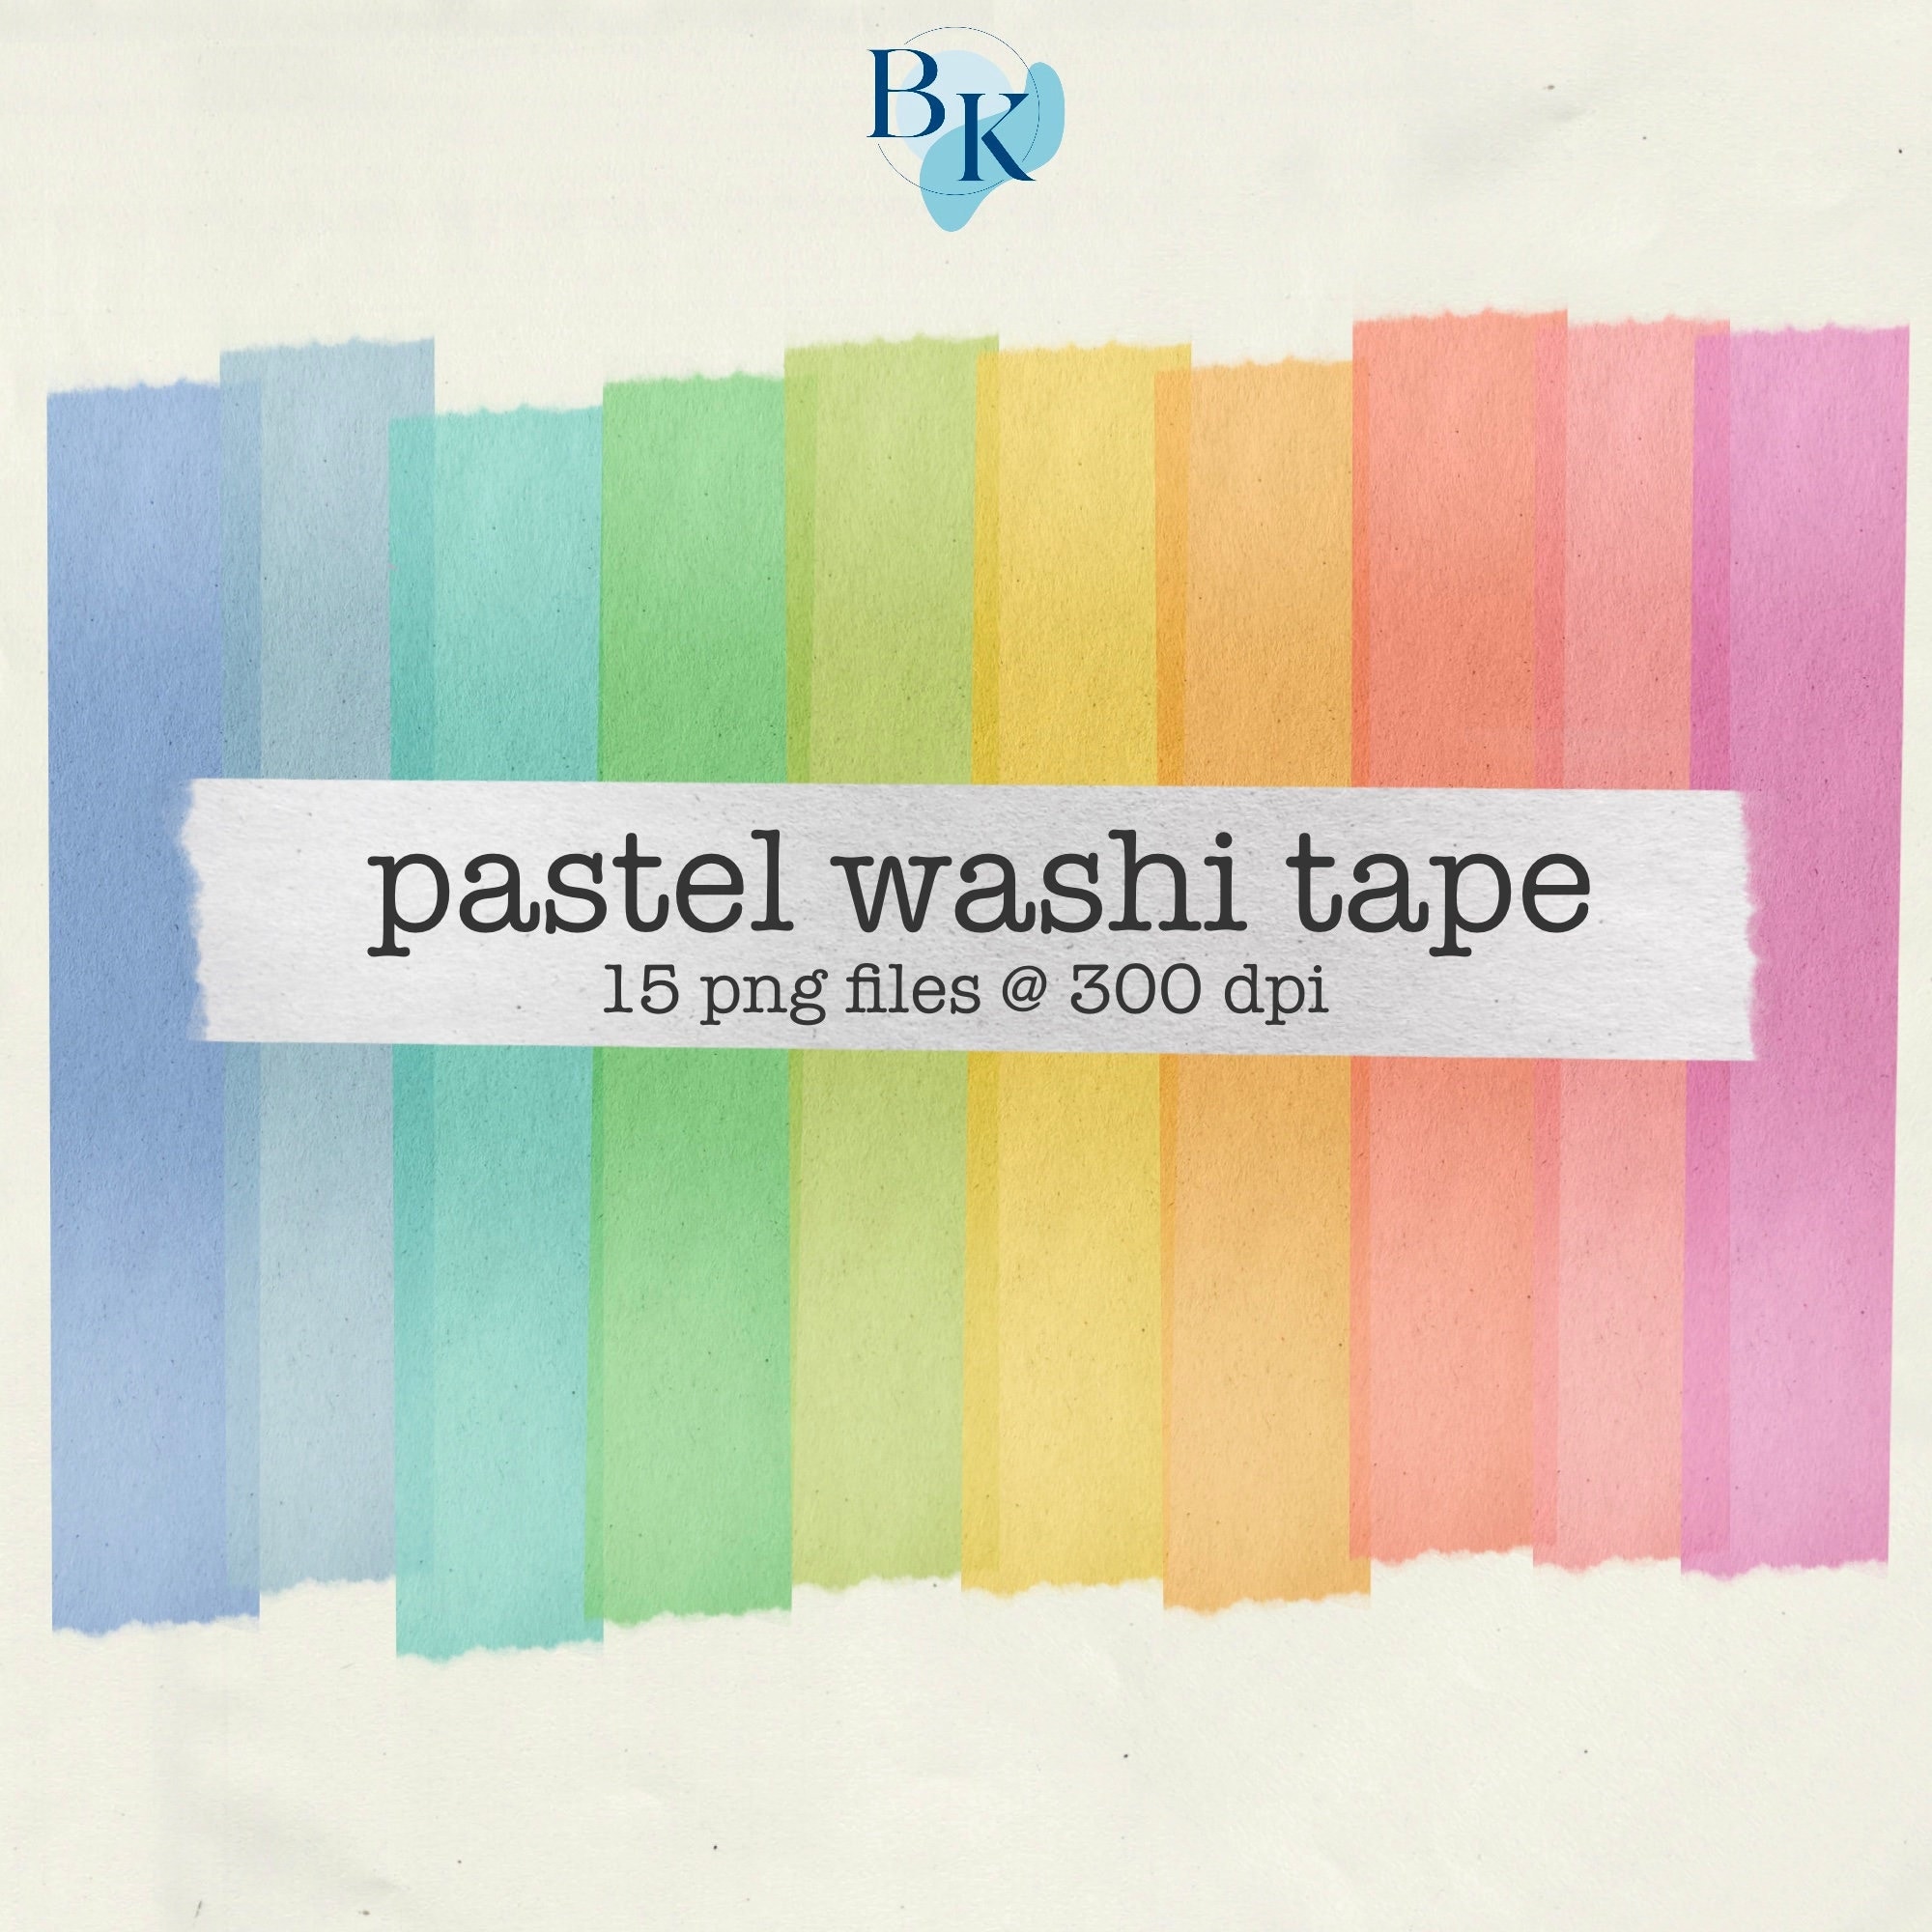 Kawaii Washi Tape Samples Decorative Tape for Crafts Cute Planner  Decorations Embellishments for Journaling 1 Meter 